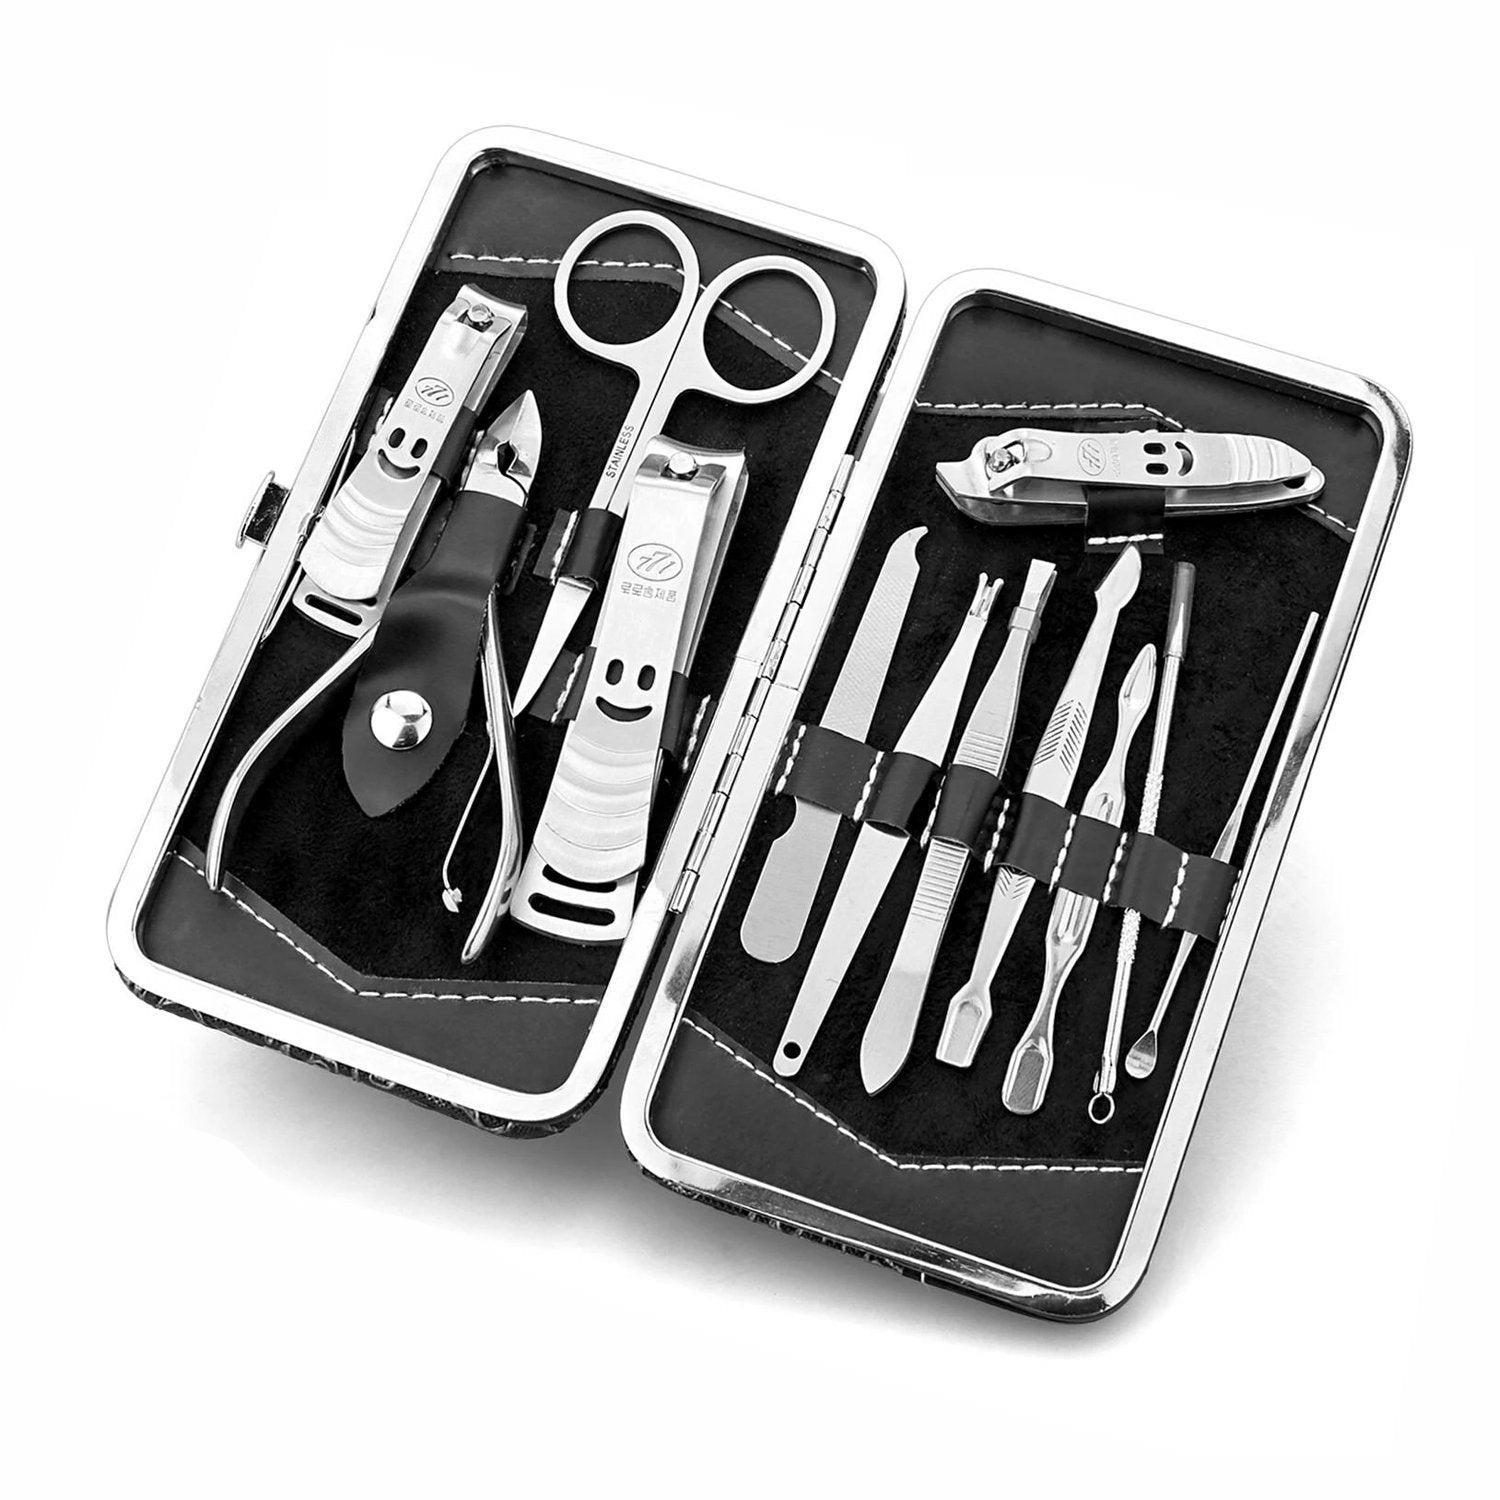 Stainless Nail Clippers Kit - 12 pcs